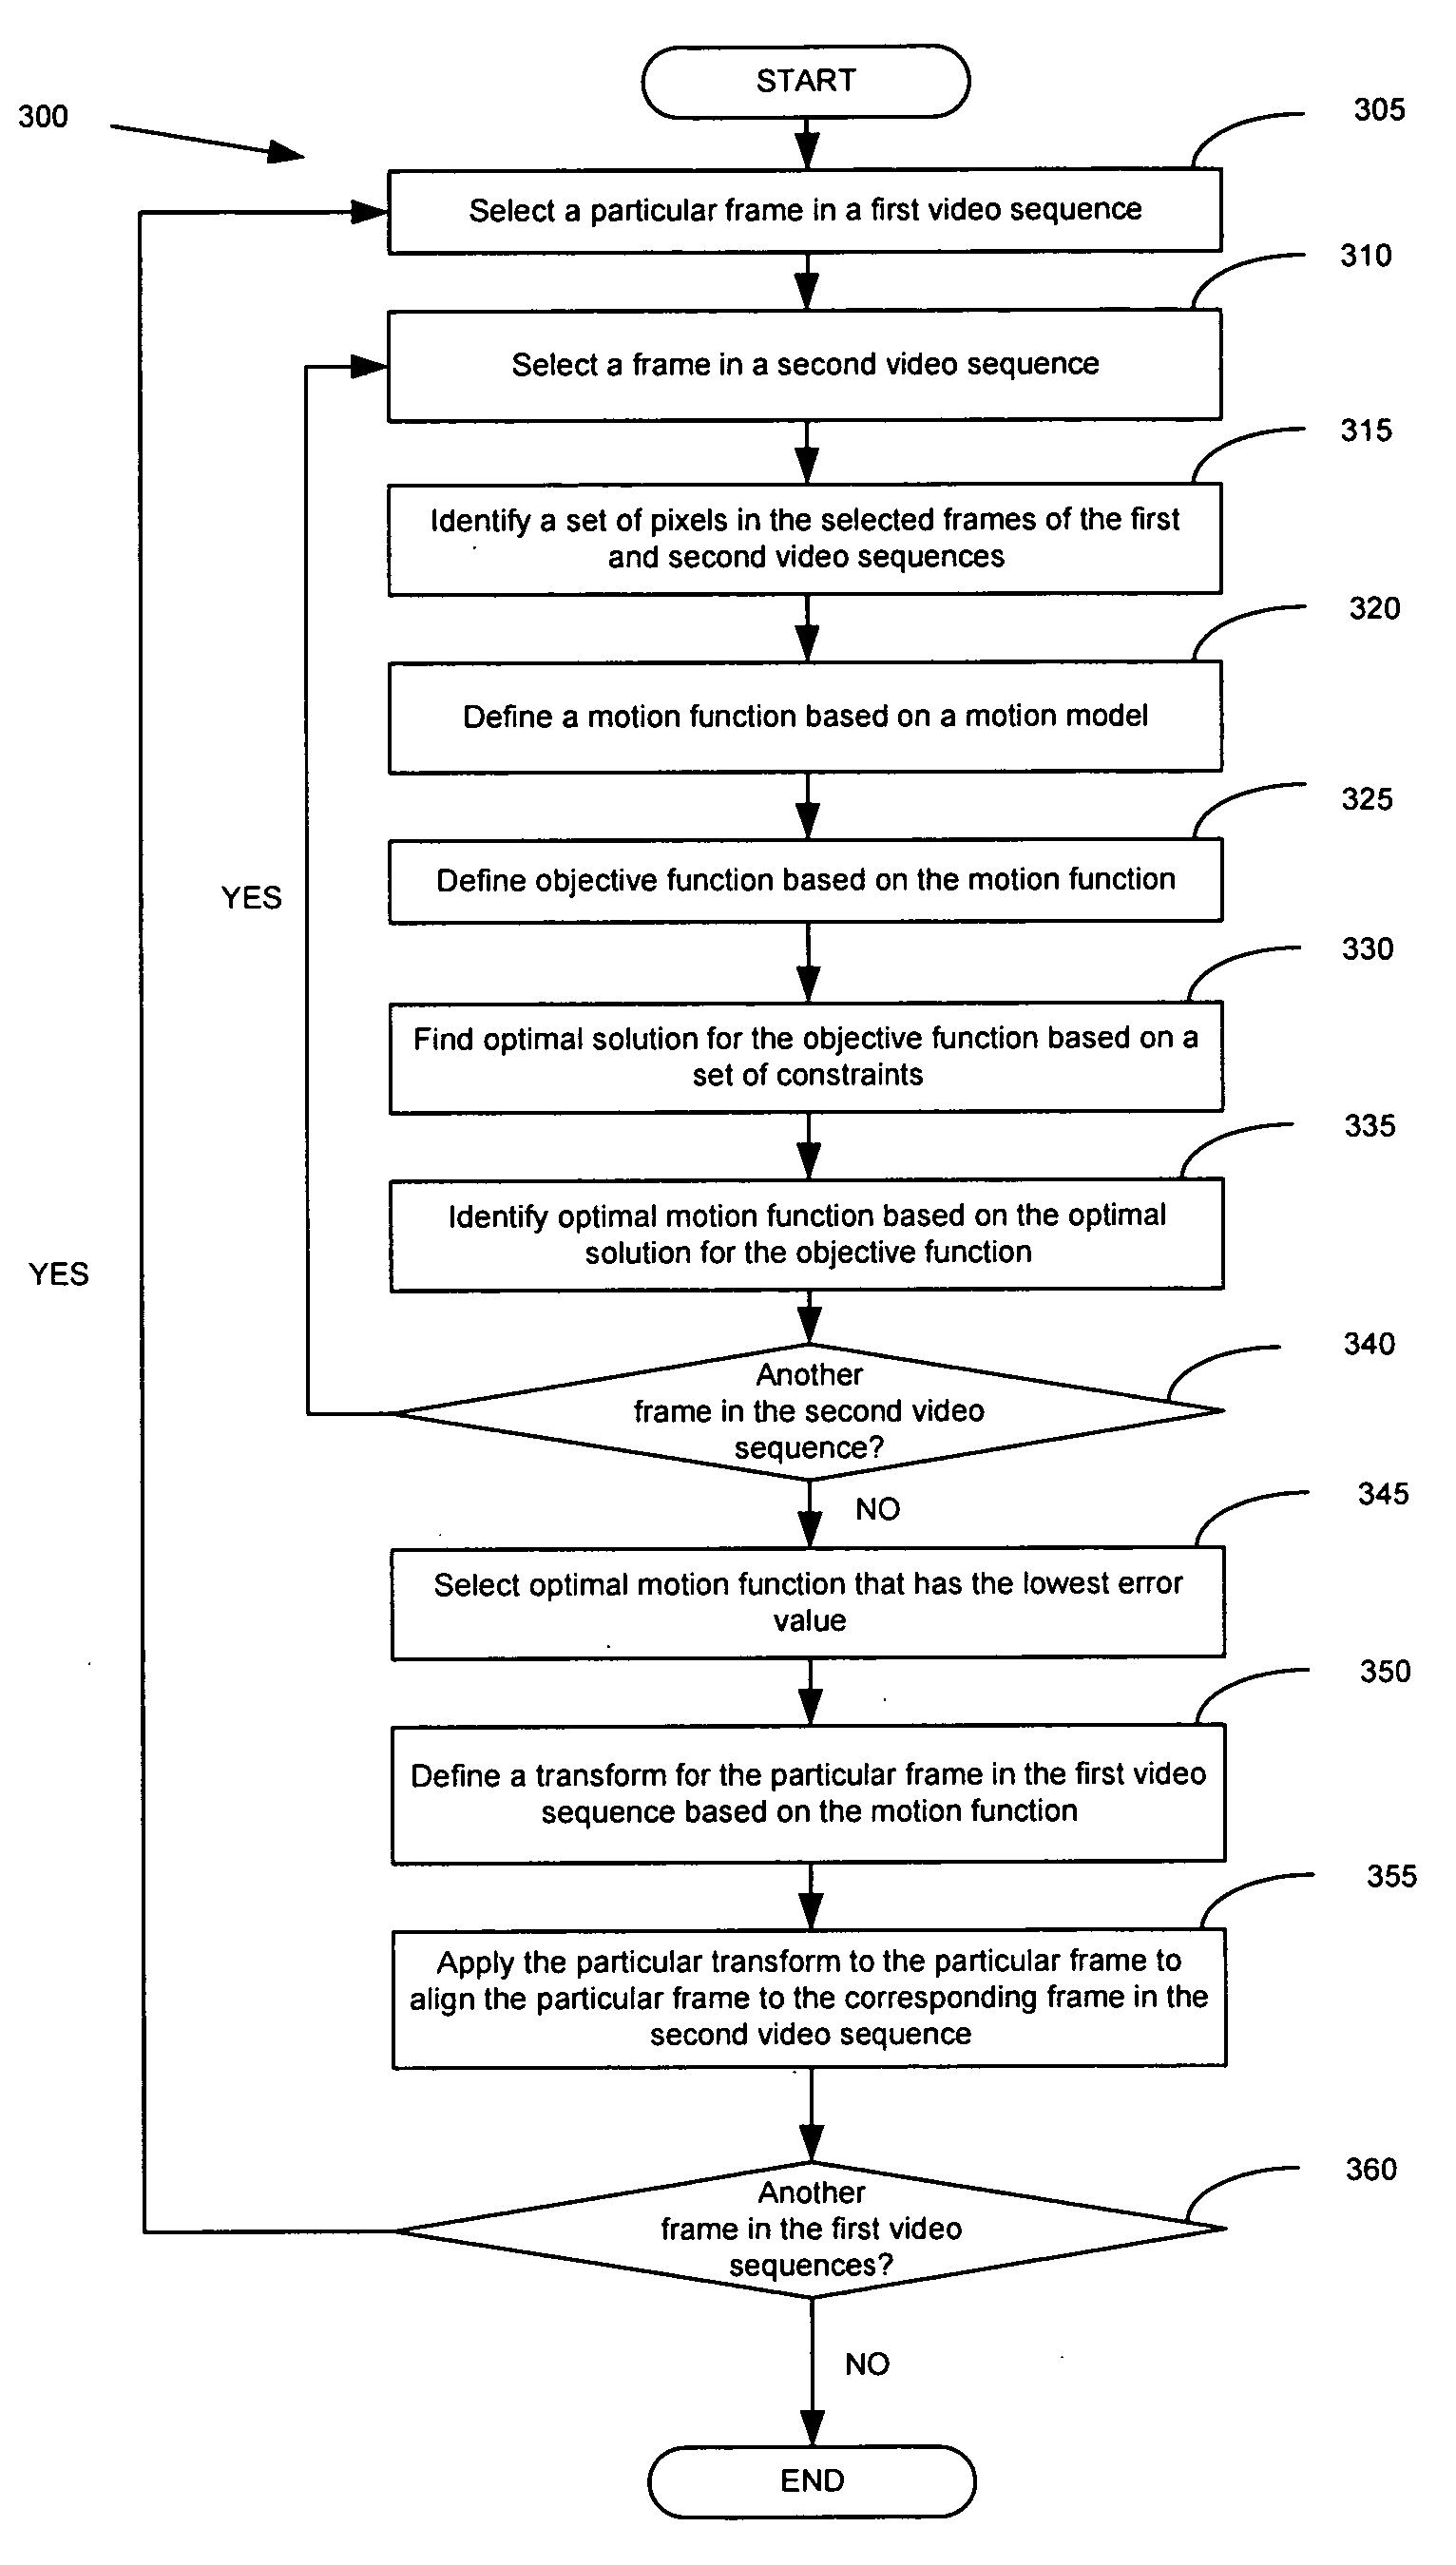 Spatial and temporal alignment of video sequences